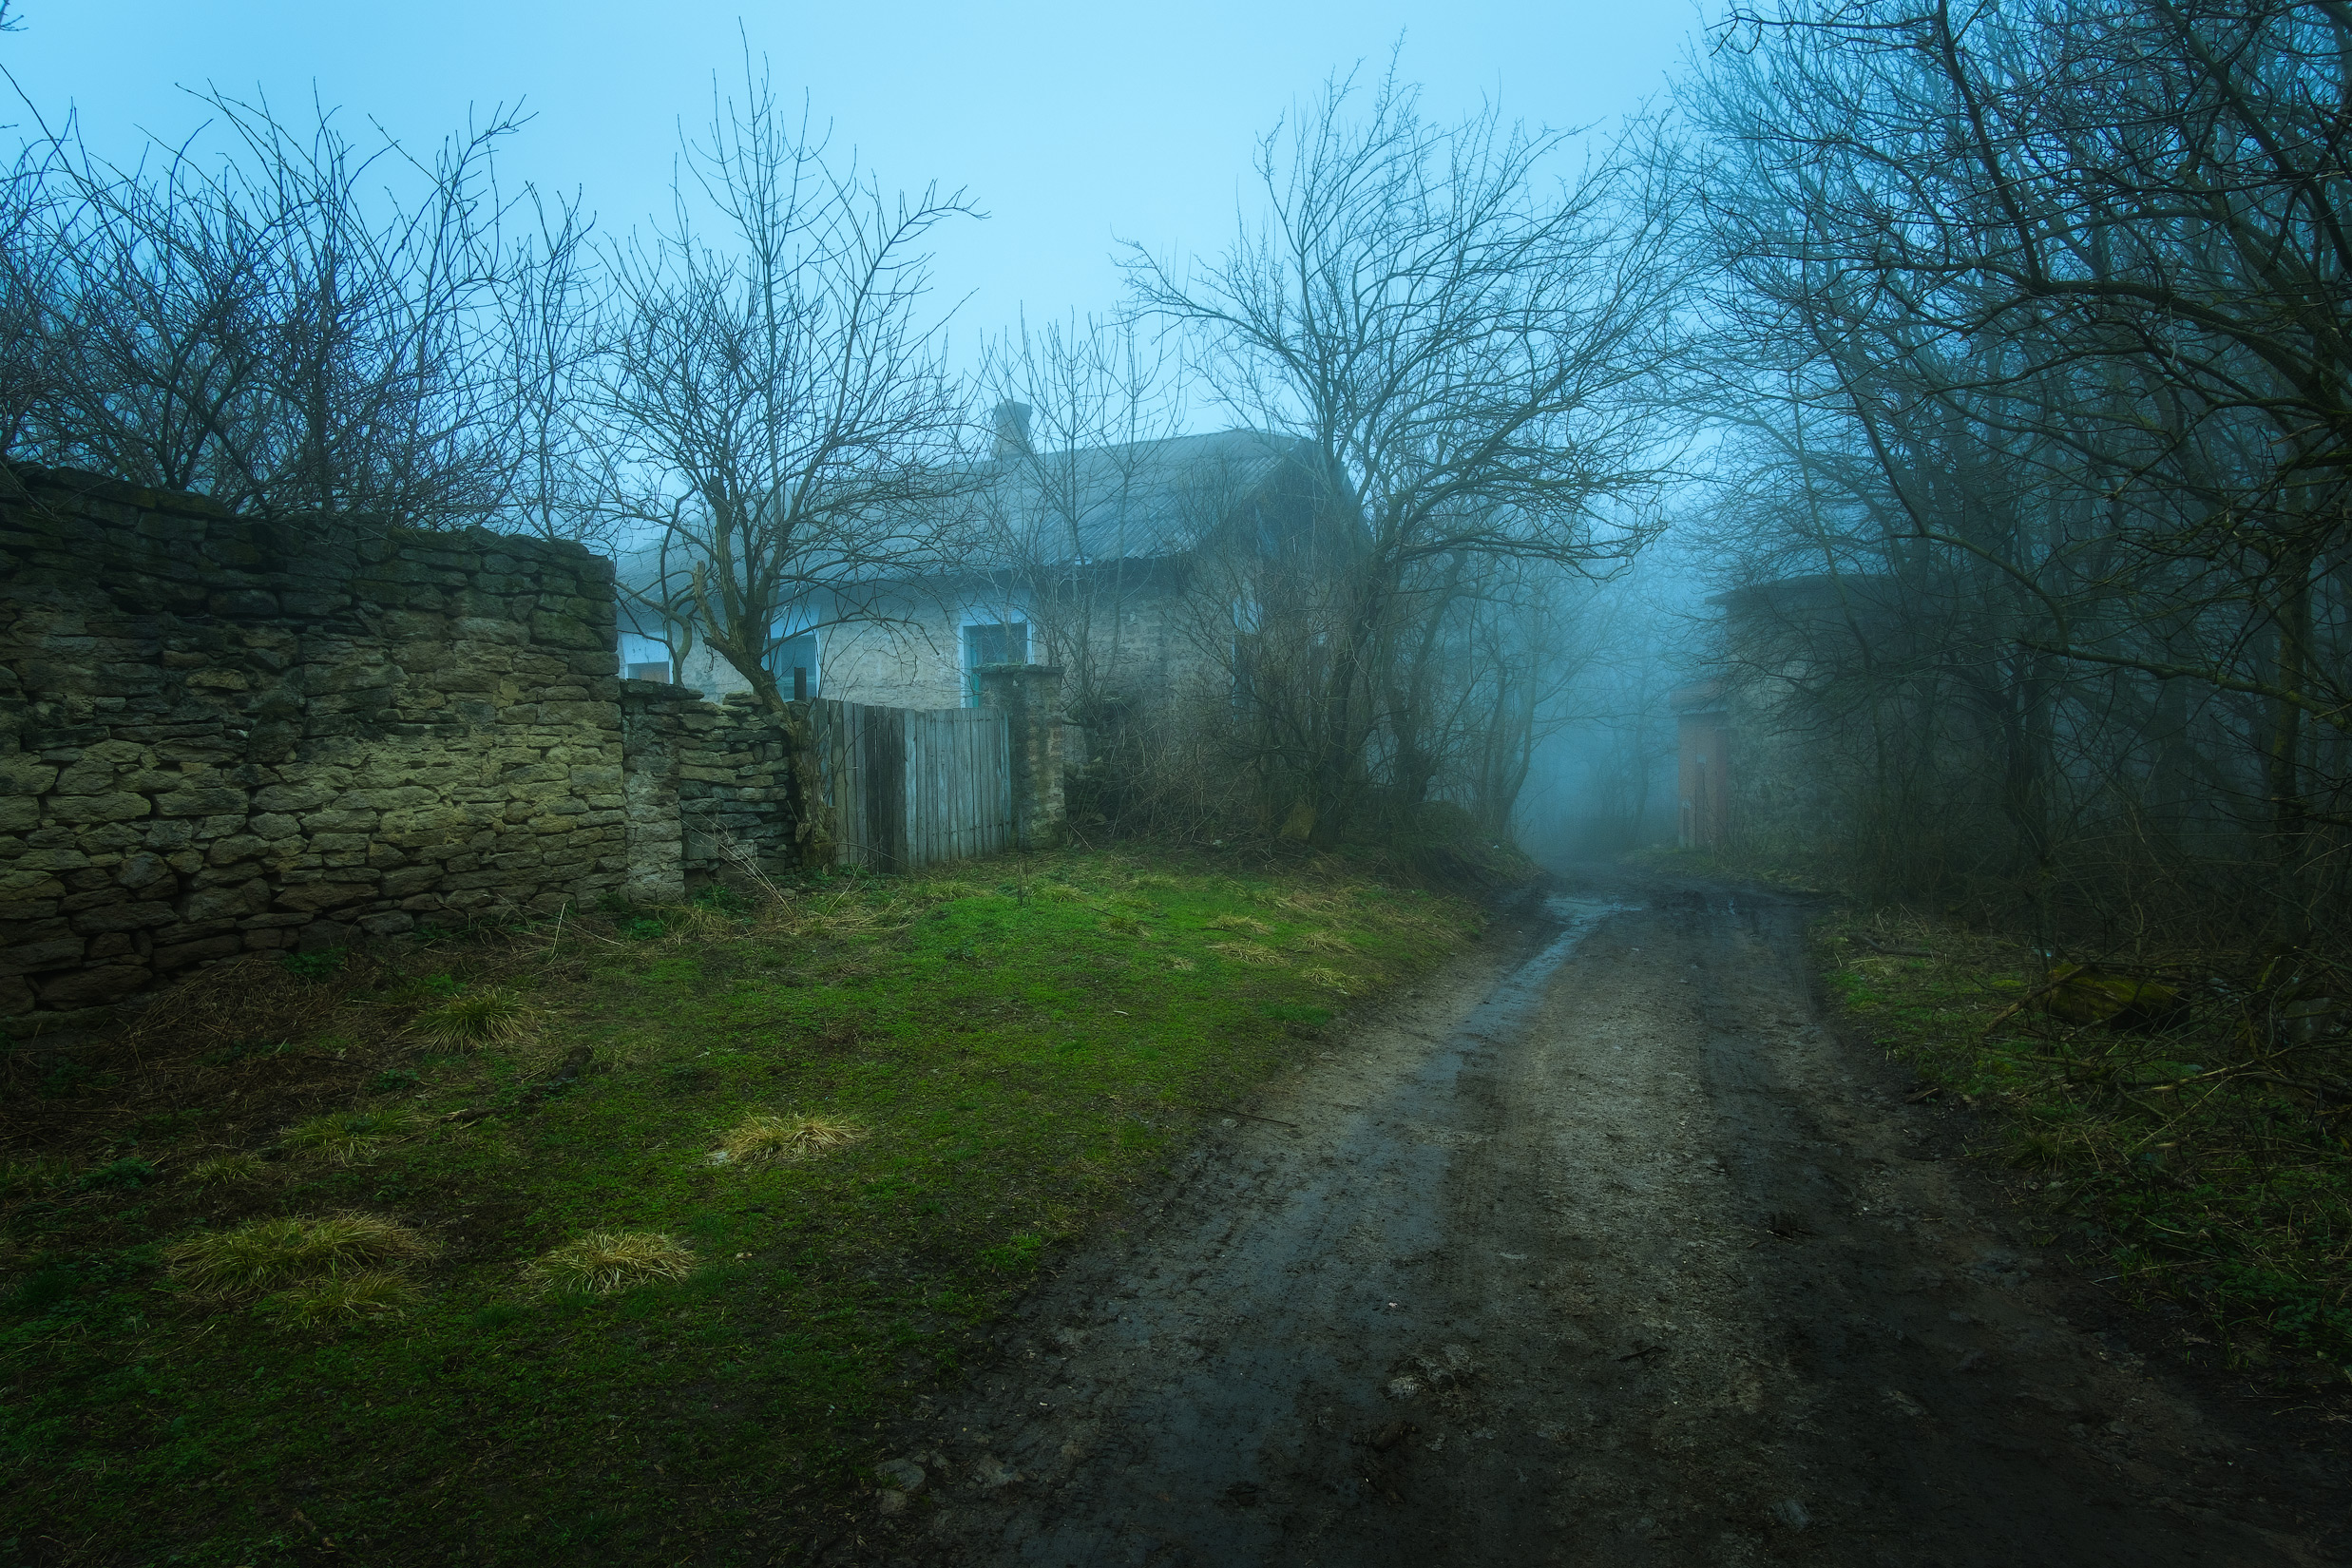 General 2475x1650 dirt road mist trees house dirt mud grass gloomy fall stone wall old building